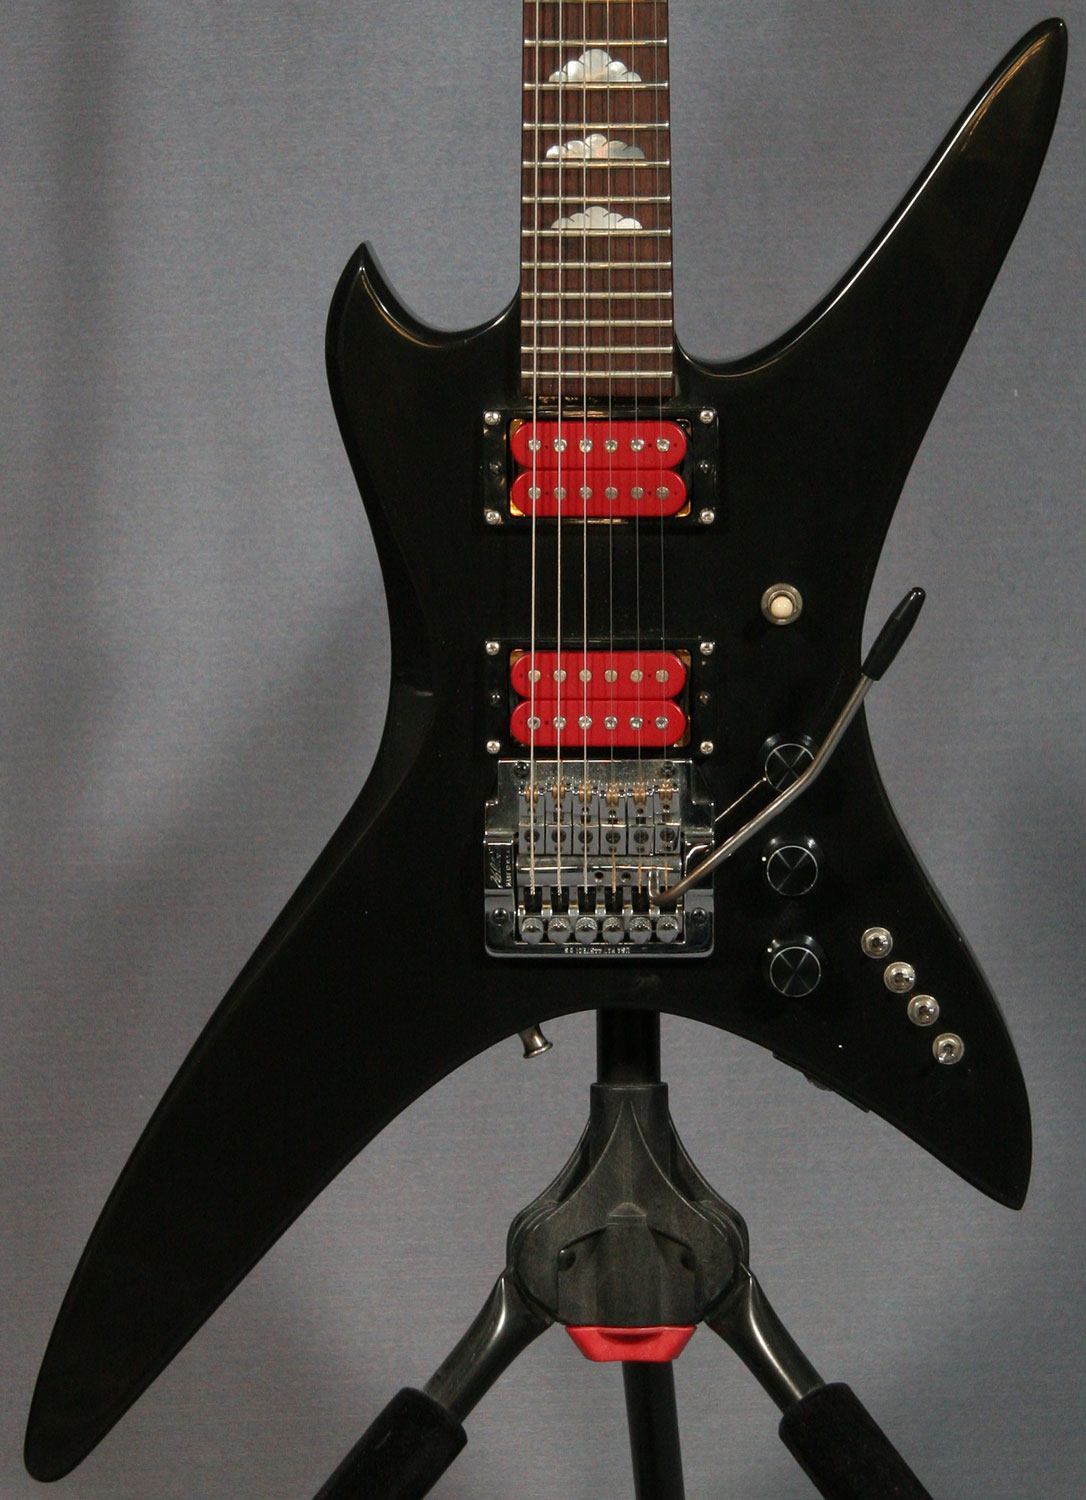 BC Rich Stealth Guitar Signed By Rick Derringer Bc Rich View